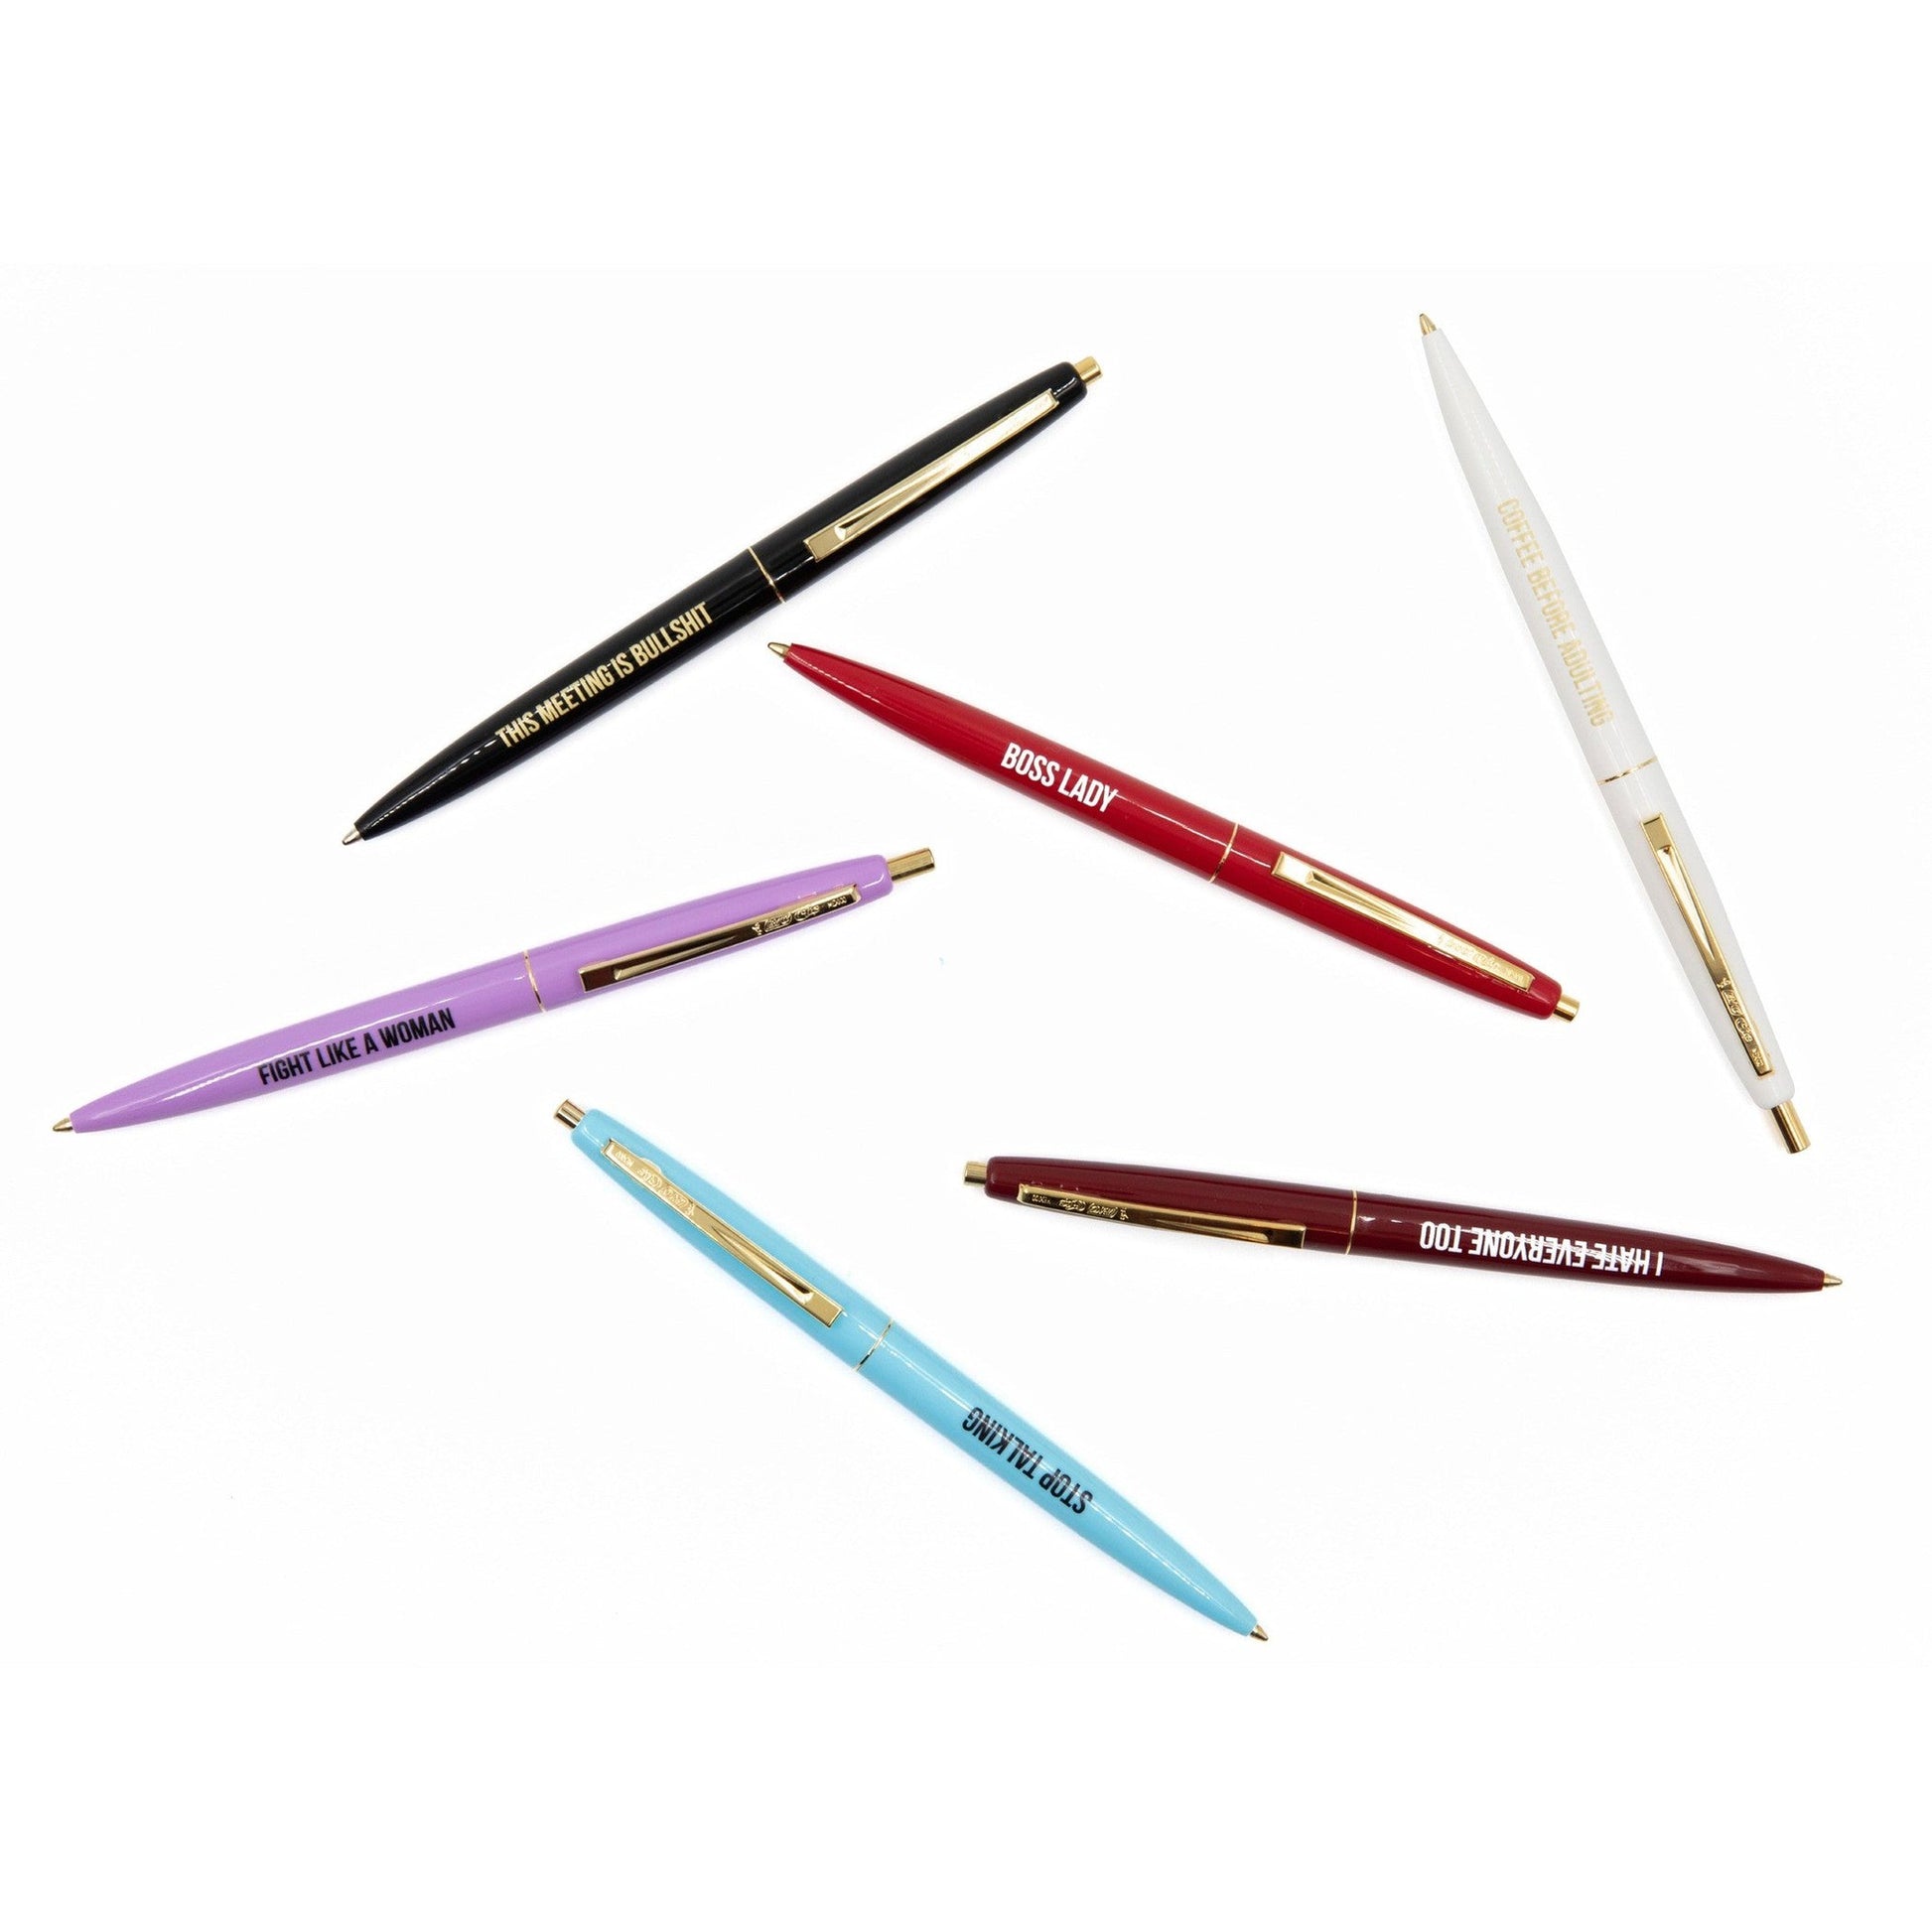 MESMOS Fancy Pen Set, Inspirational Gifts for Women, Motivational Gifts, Office Motivational Pens, Boss Lady Writing Pens, Ni